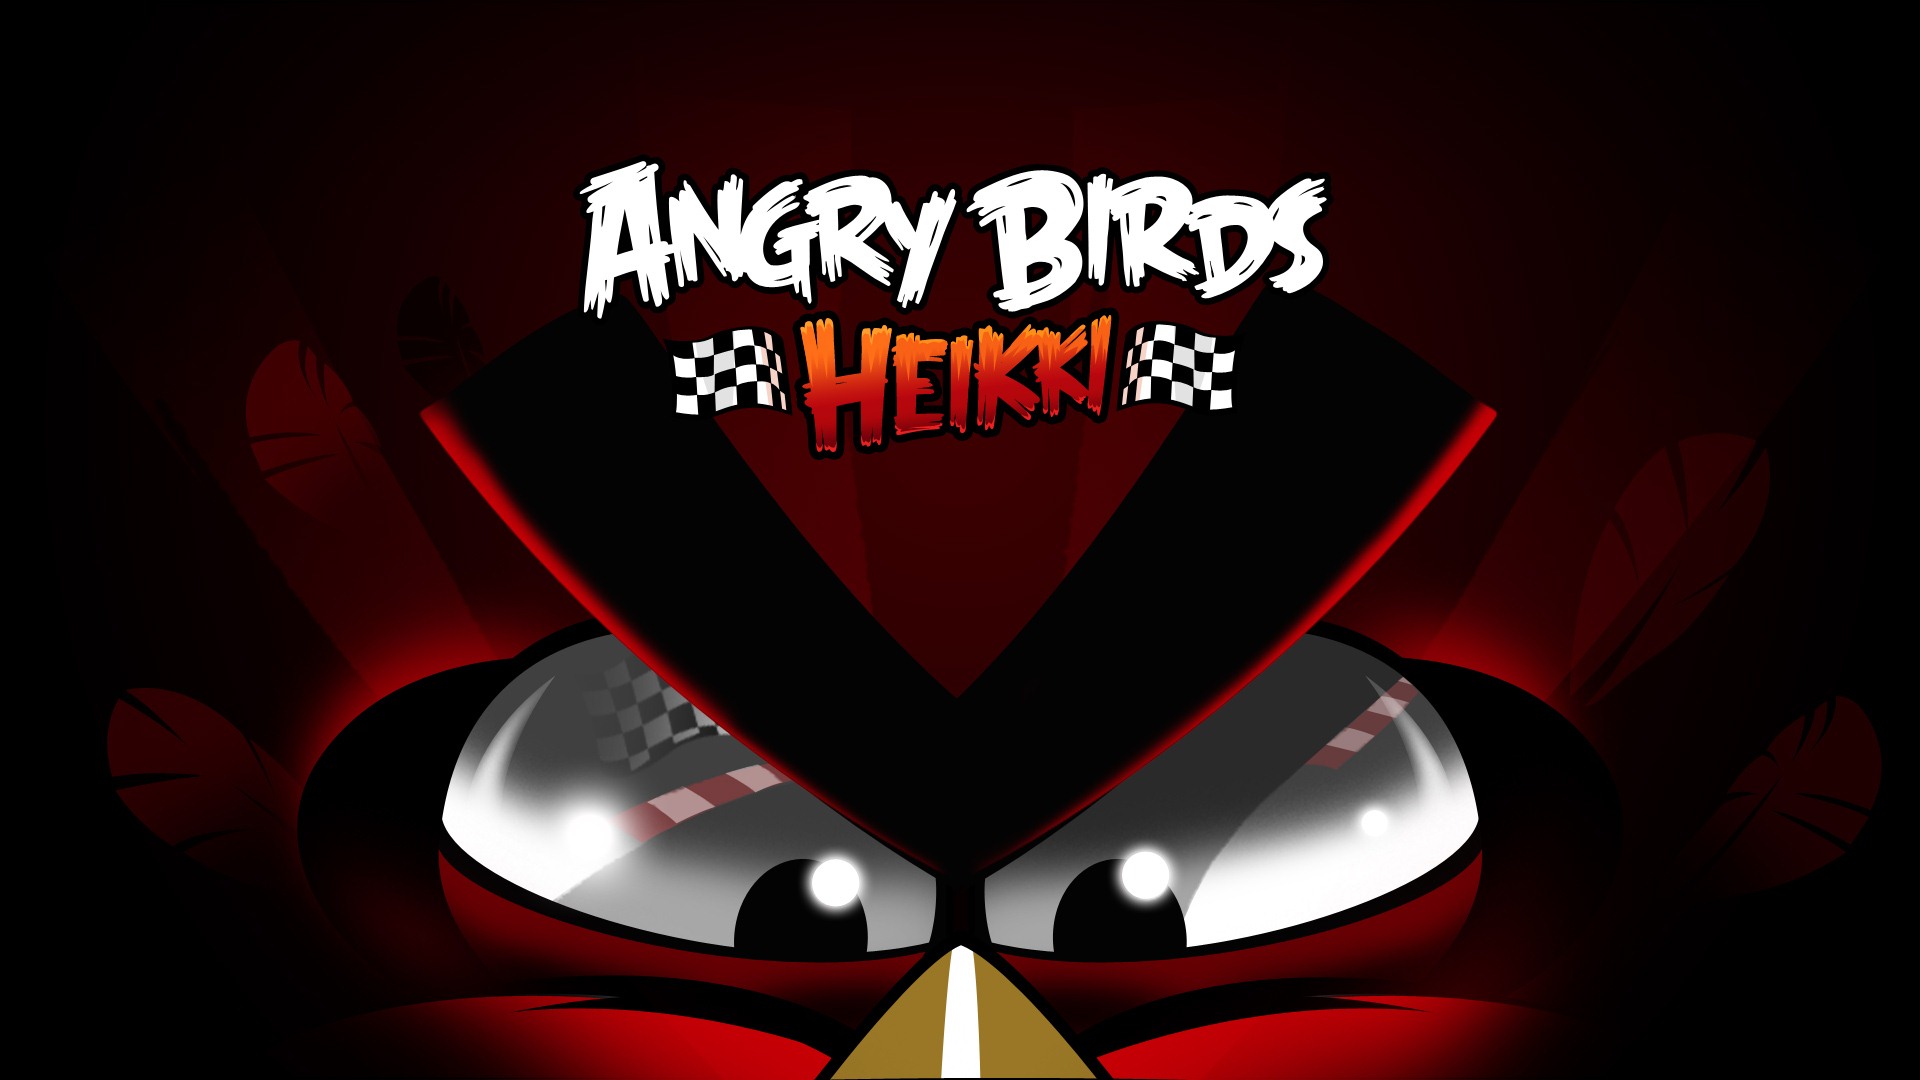 Angry Birds Game Wallpapers #18 - 1920x1080